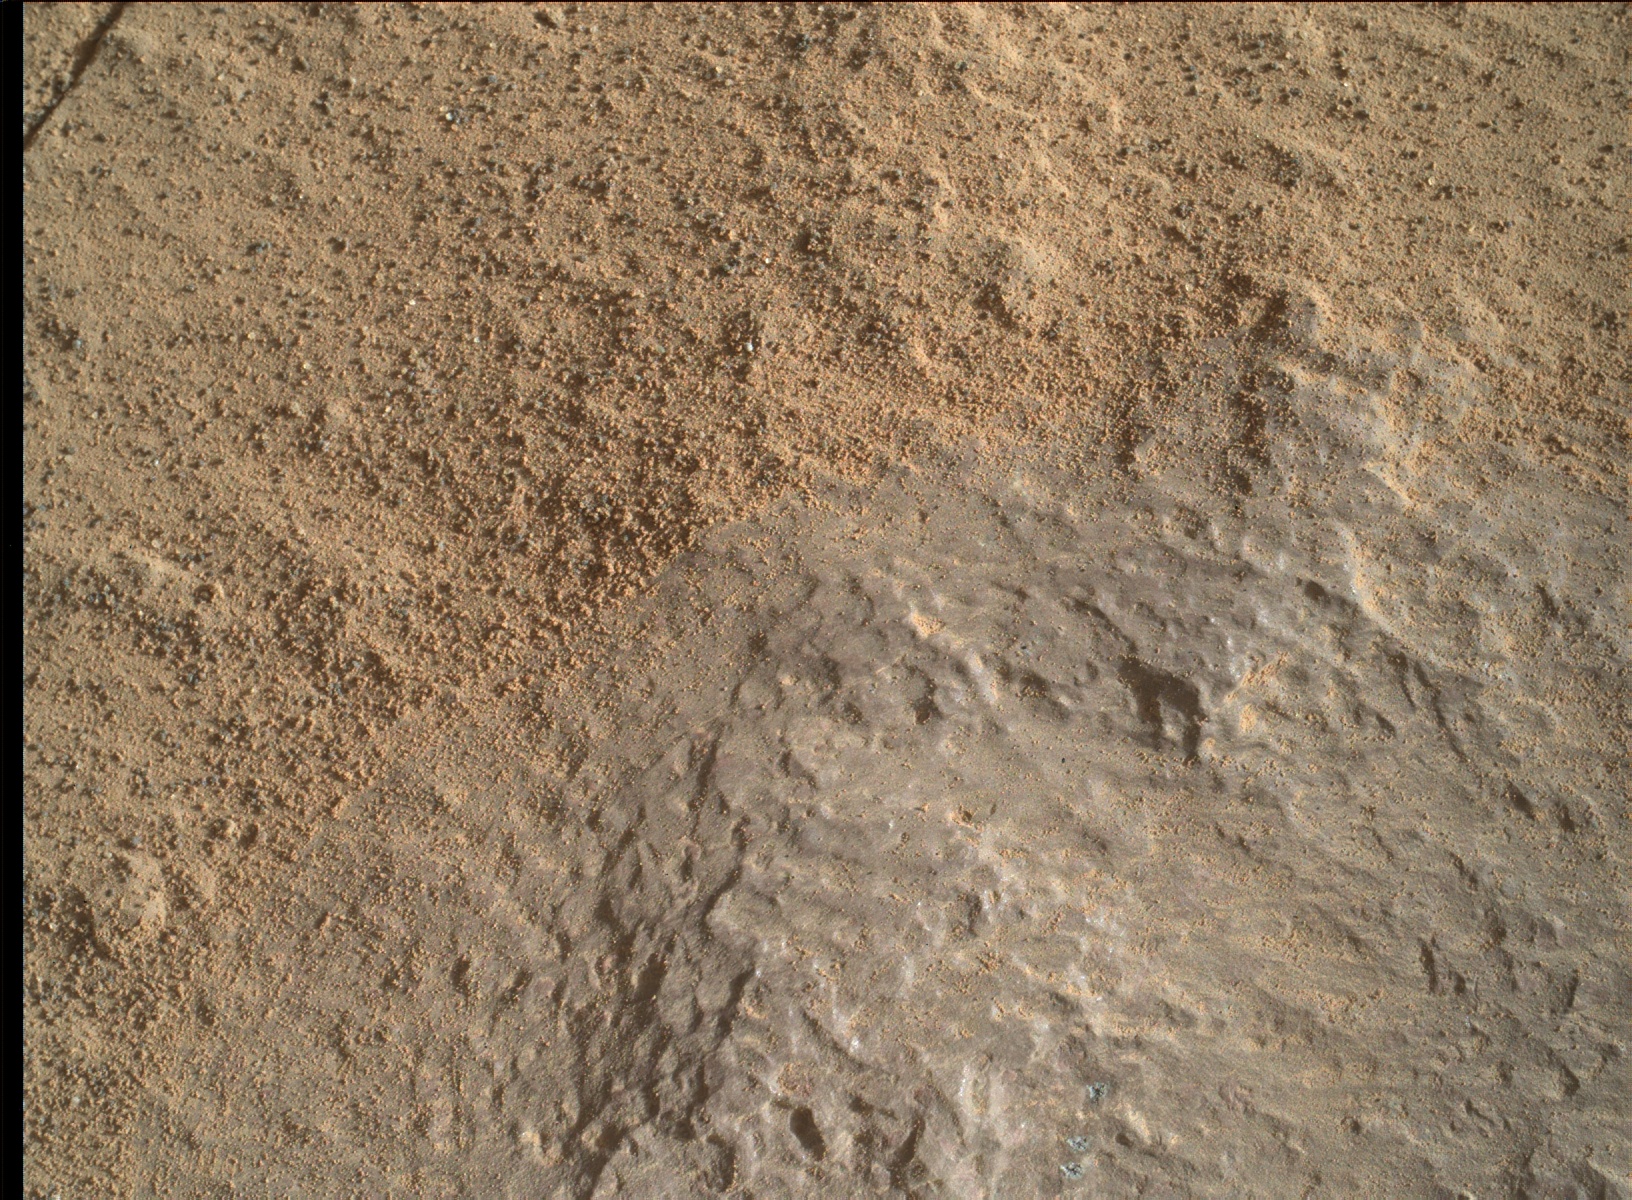 Nasa's Mars rover Curiosity acquired this image using its Mars Hand Lens Imager (MAHLI) on Sol 1254